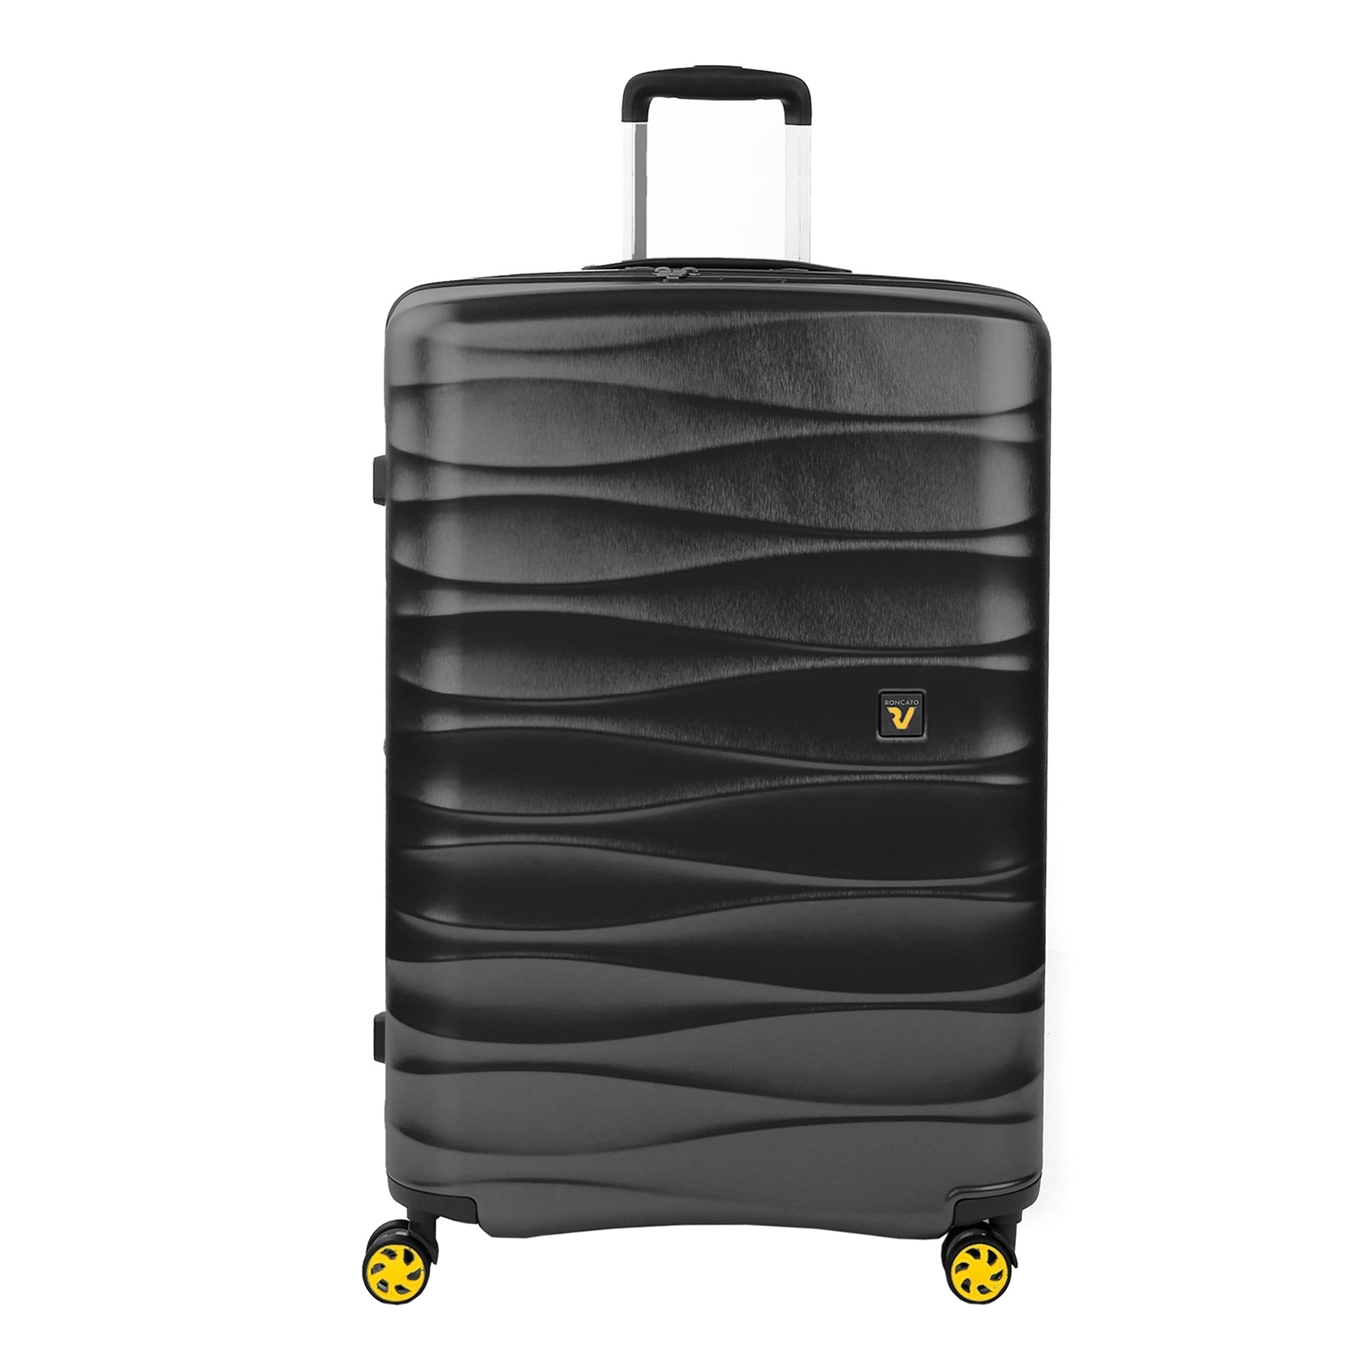 Roncato Roncato Stellar Large 4 Wiel Trolley Exp antracite Harde Koffer Grijs